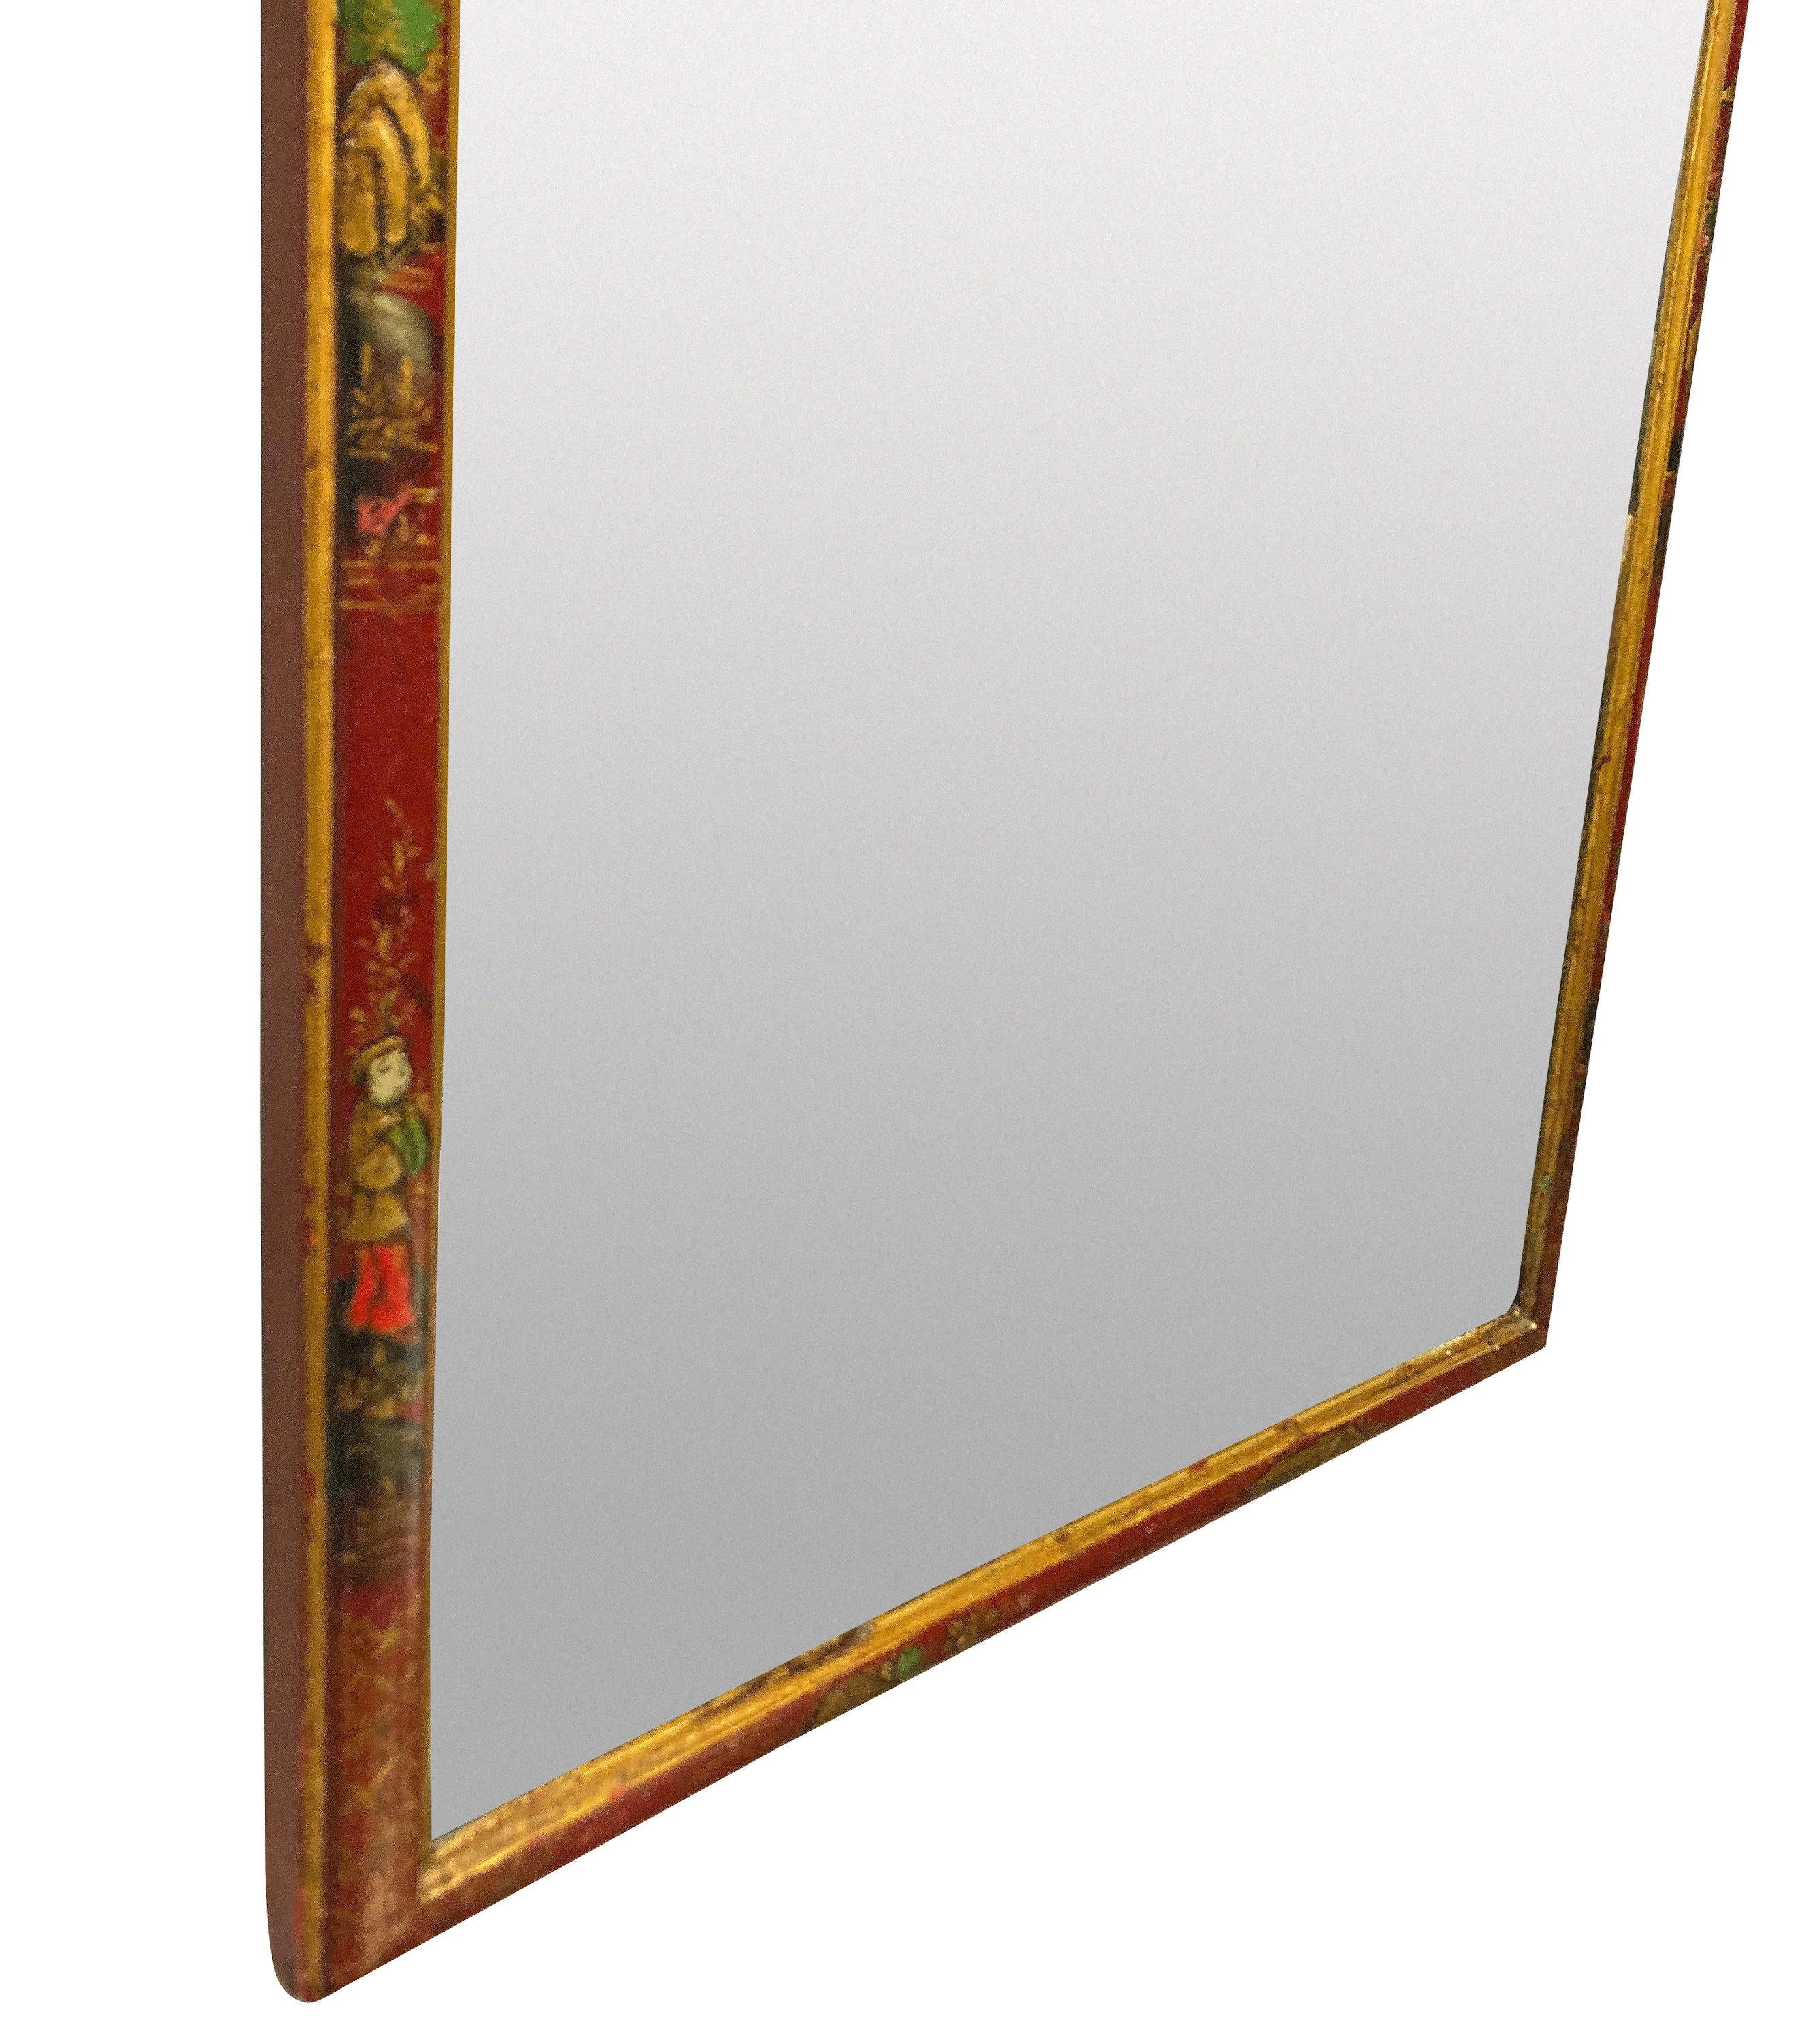 An English scarlet japanned Queen Anne style mirror, with hand painted scenes. There are two vertical scratches to the mirror plate.